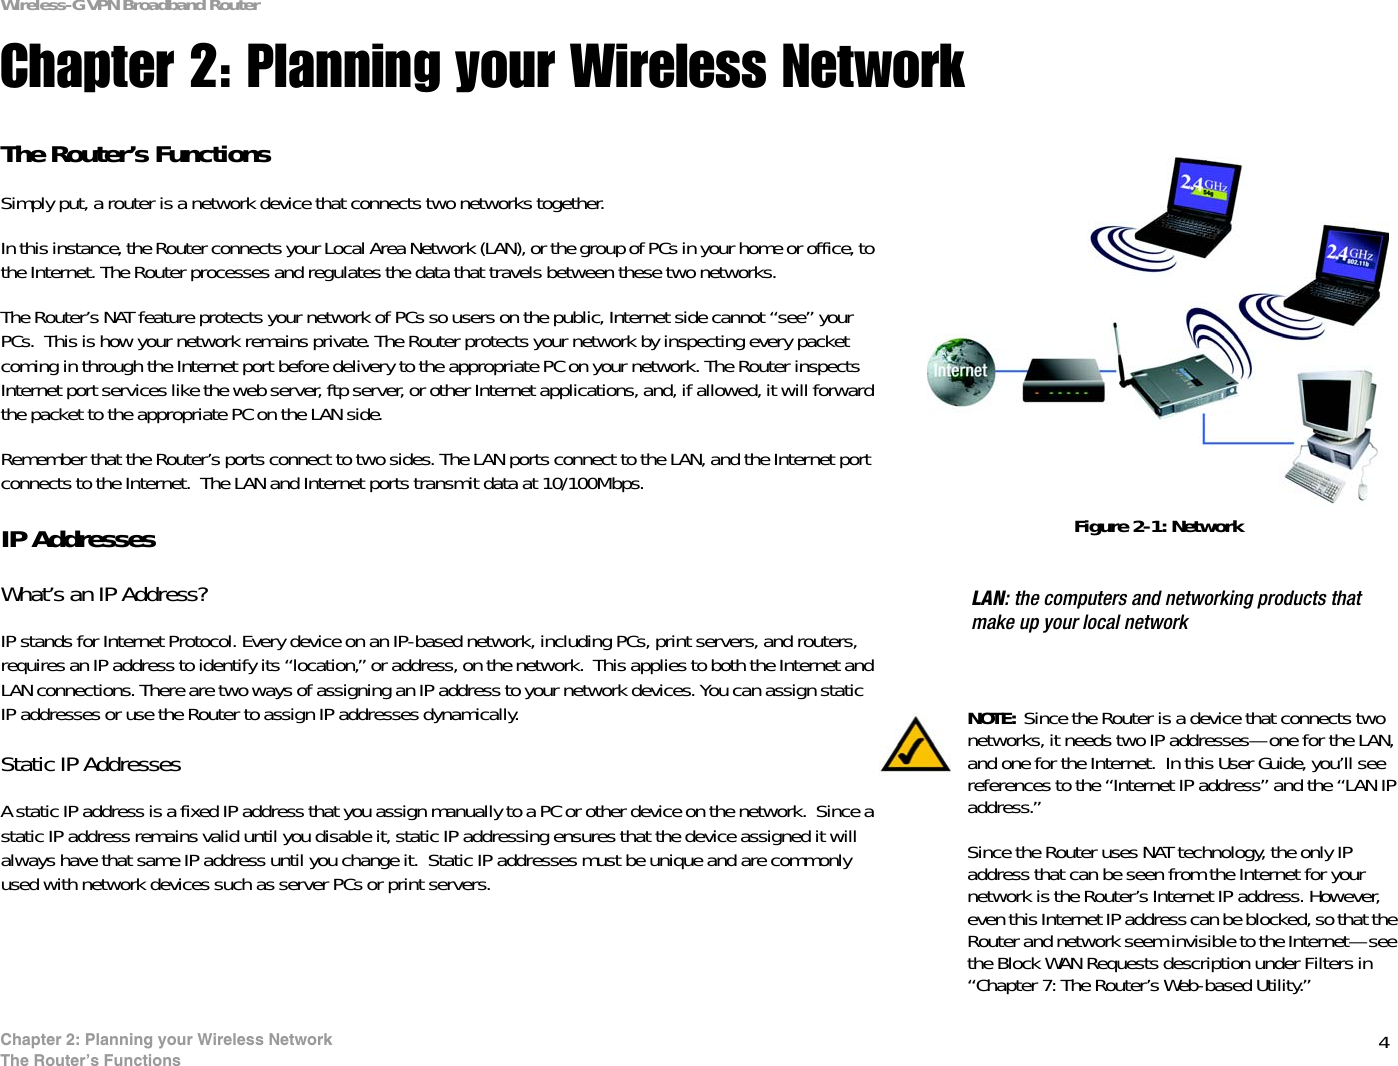 4Chapter 2: Planning your Wireless NetworkThe Router’s FunctionsWireless-G VPN Broadband RouterChapter 2: Planning your Wireless NetworkThe Router’s FunctionsSimply put, a router is a network device that connects two networks together. In this instance, the Router connects your Local Area Network (LAN), or the group of PCs in your home or office, to the Internet. The Router processes and regulates the data that travels between these two networks.The Router’s NAT feature protects your network of PCs so users on the public, Internet side cannot “see” your PCs.  This is how your network remains private. The Router protects your network by inspecting every packet coming in through the Internet port before delivery to the appropriate PC on your network. The Router inspects Internet port services like the web server, ftp server, or other Internet applications, and, if allowed, it will forward the packet to the appropriate PC on the LAN side.Remember that the Router’s ports connect to two sides. The LAN ports connect to the LAN, and the Internet port connects to the Internet.  The LAN and Internet ports transmit data at 10/100Mbps.IP AddressesWhat’s an IP Address?IP stands for Internet Protocol. Every device on an IP-based network, including PCs, print servers, and routers, requires an IP address to identify its “location,” or address, on the network.  This applies to both the Internet and LAN connections. There are two ways of assigning an IP address to your network devices. You can assign static IP addresses or use the Router to assign IP addresses dynamically.Static IP Addresses  A static IP address is a fixed IP address that you assign manually to a PC or other device on the network.  Since a static IP address remains valid until you disable it, static IP addressing ensures that the device assigned it will always have that same IP address until you change it.  Static IP addresses must be unique and are commonly used with network devices such as server PCs or print servers.LAN: the computers and networking products that make up your local networkNOTE: Since the Router is a device that connects two networks, it needs two IP addresses—one for the LAN, and one for the Internet.  In this User Guide, you’ll see references to the “Internet IP address” and the “LAN IP address.”Since the Router uses NAT technology, the only IP address that can be seen from the Internet for your network is the Router’s Internet IP address. However, even this Internet IP address can be blocked, so that the Router and network seem invisible to the Internet—see the Block WAN Requests description under Filters in “Chapter 7: The Router’s Web-based Utility.”Figure 2-1: Network